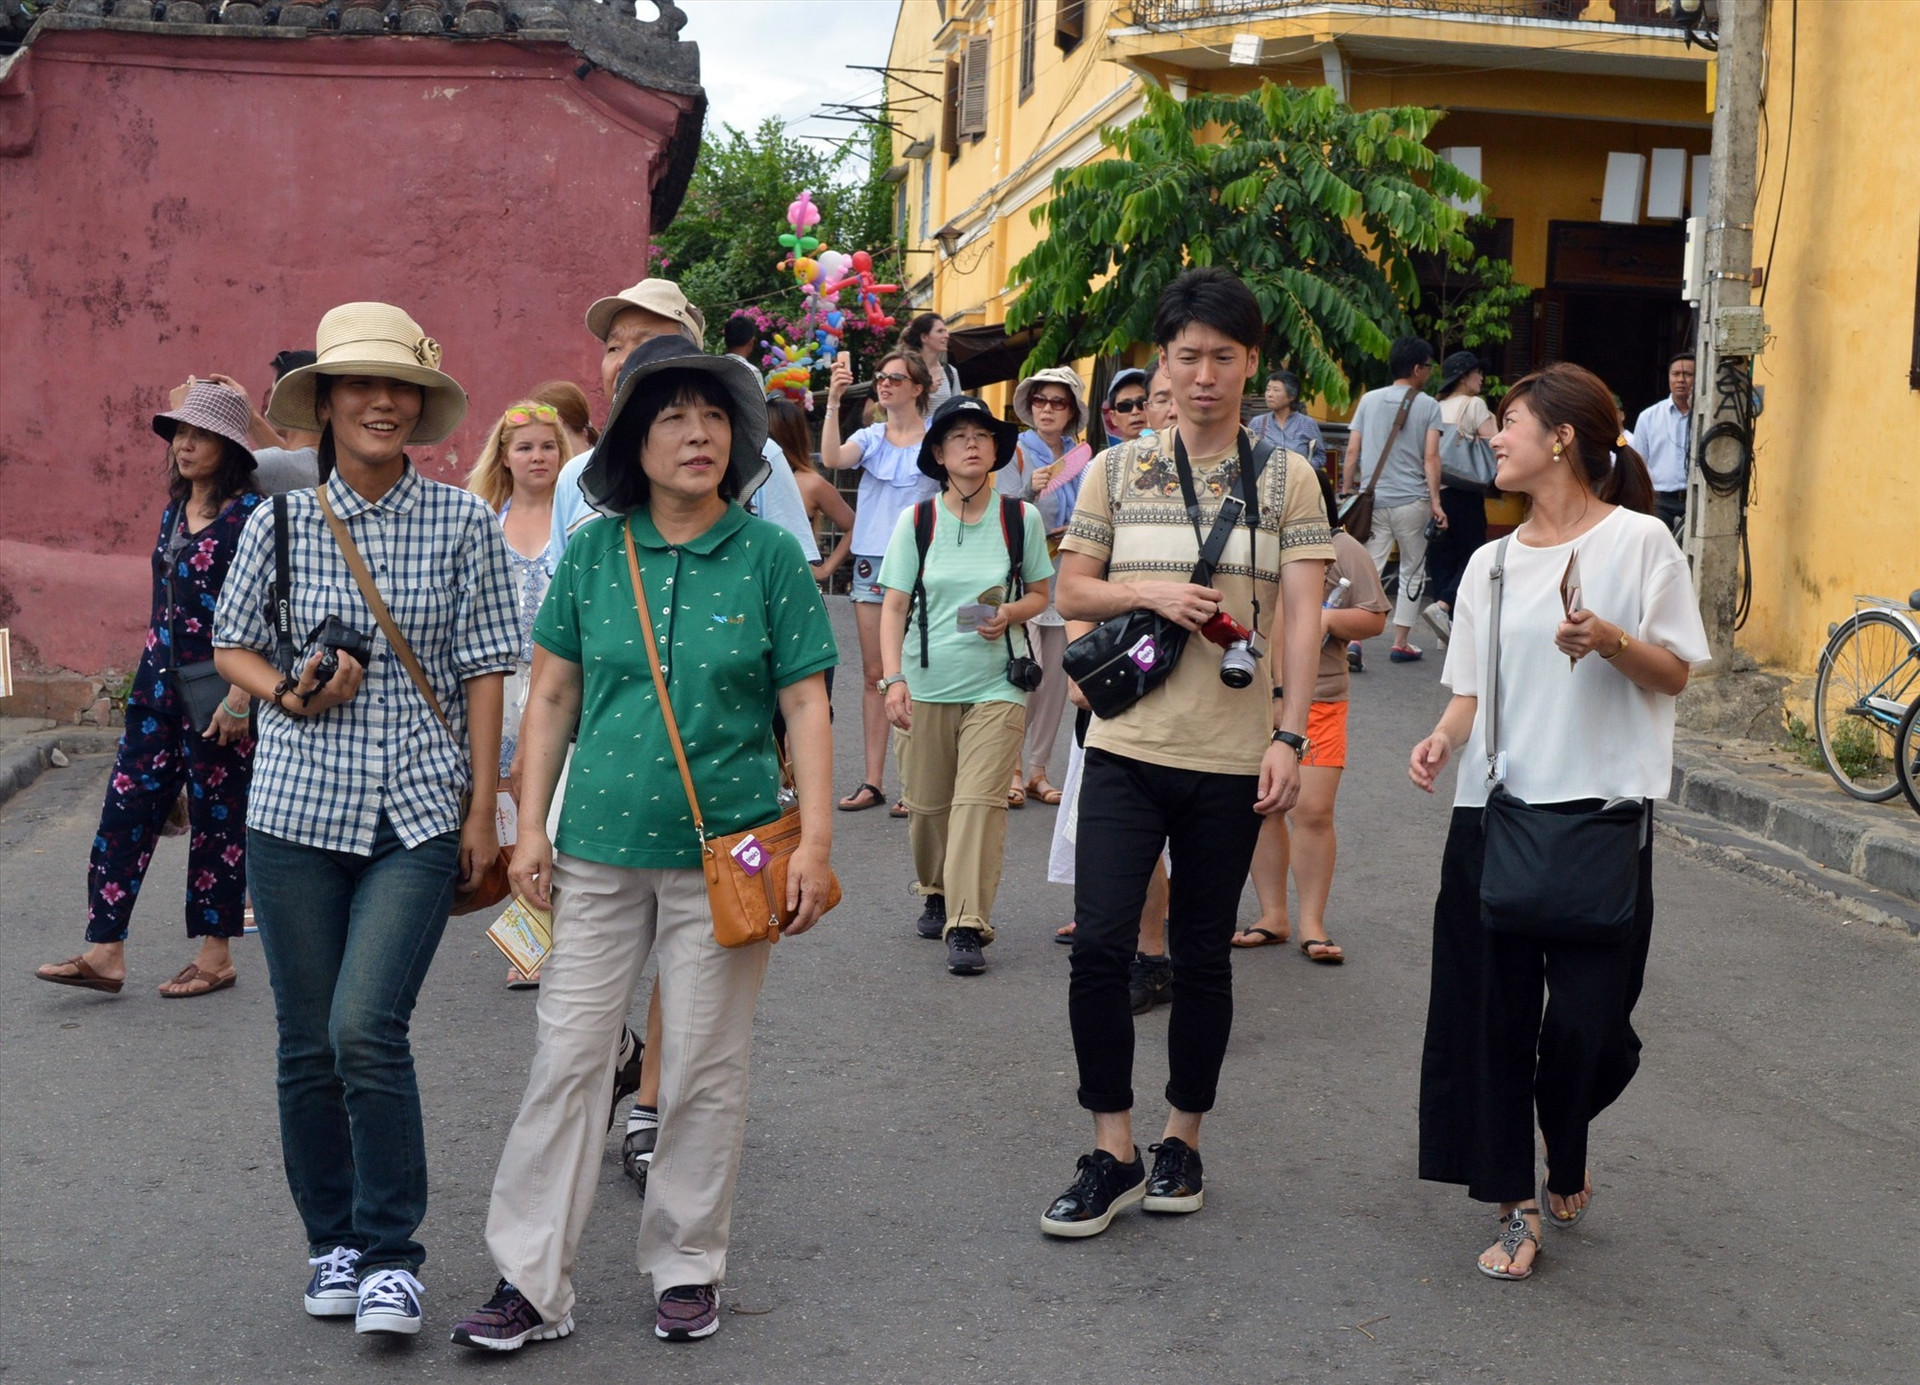 Japanese visitors in Hoi An city, Quang Nam province